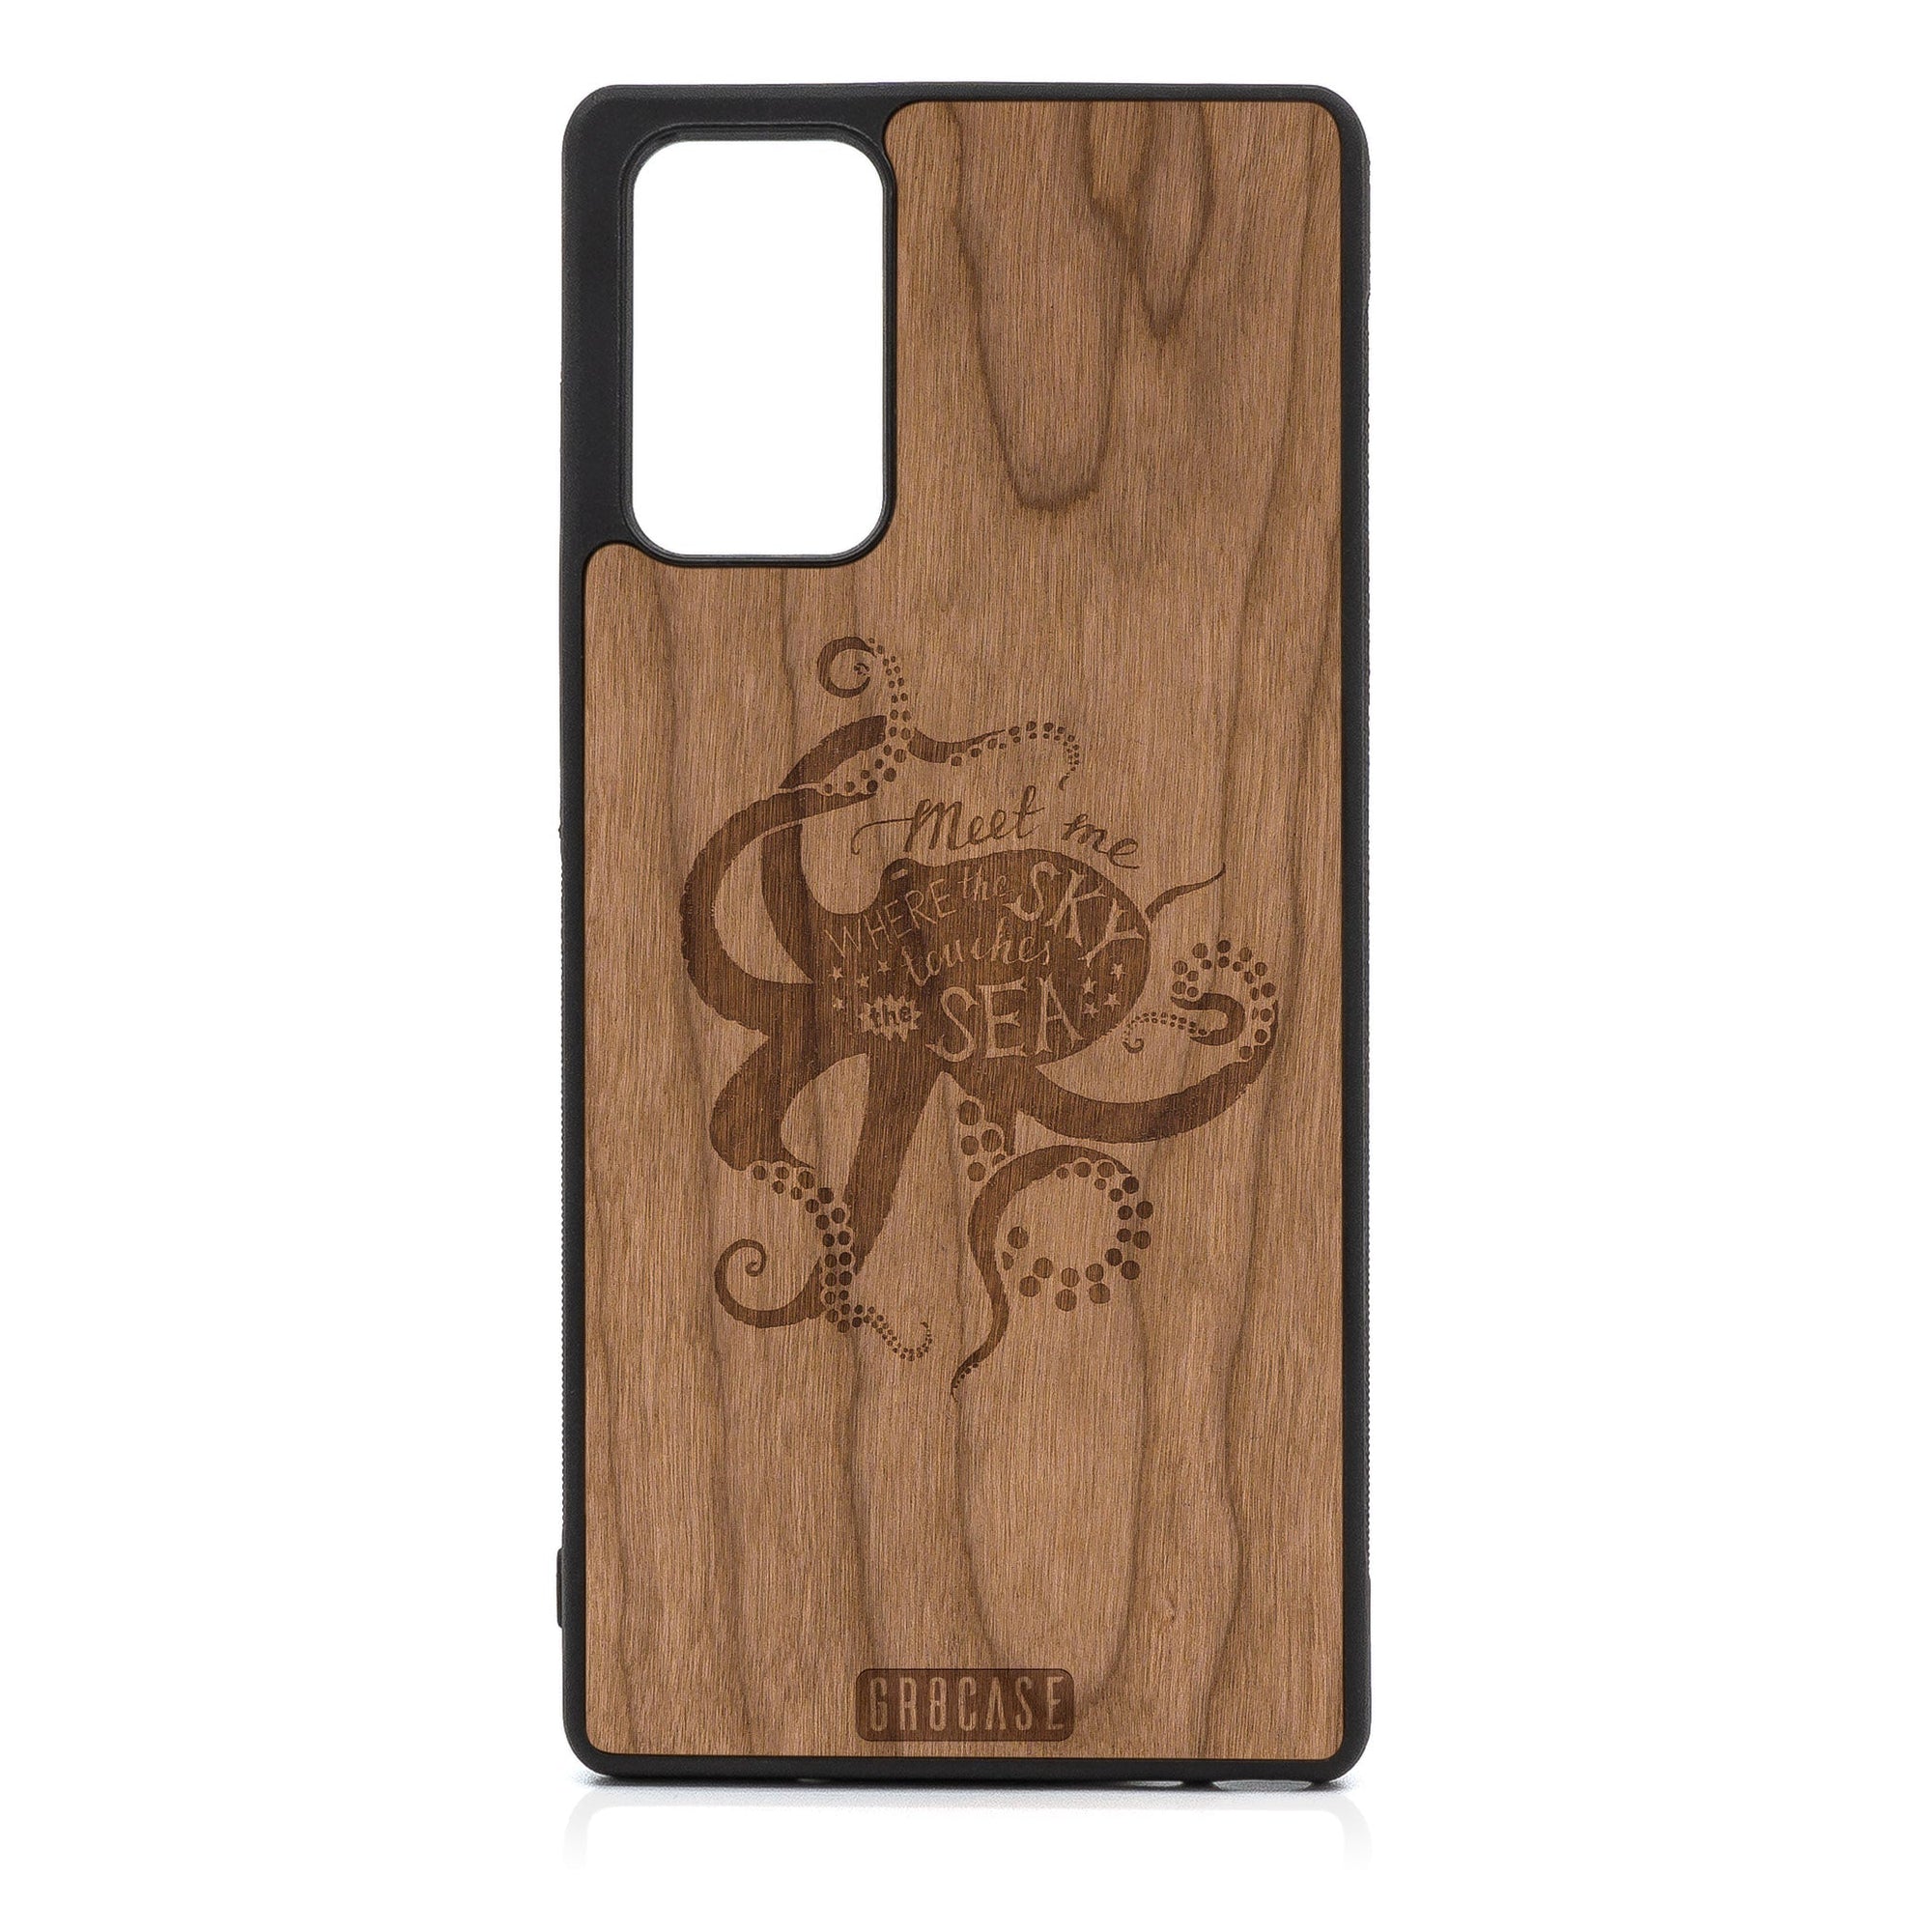 Meet Me Where The Sky Touches The Sea (Octopus) Design Wood Case For Samsung Galaxy A71 5G